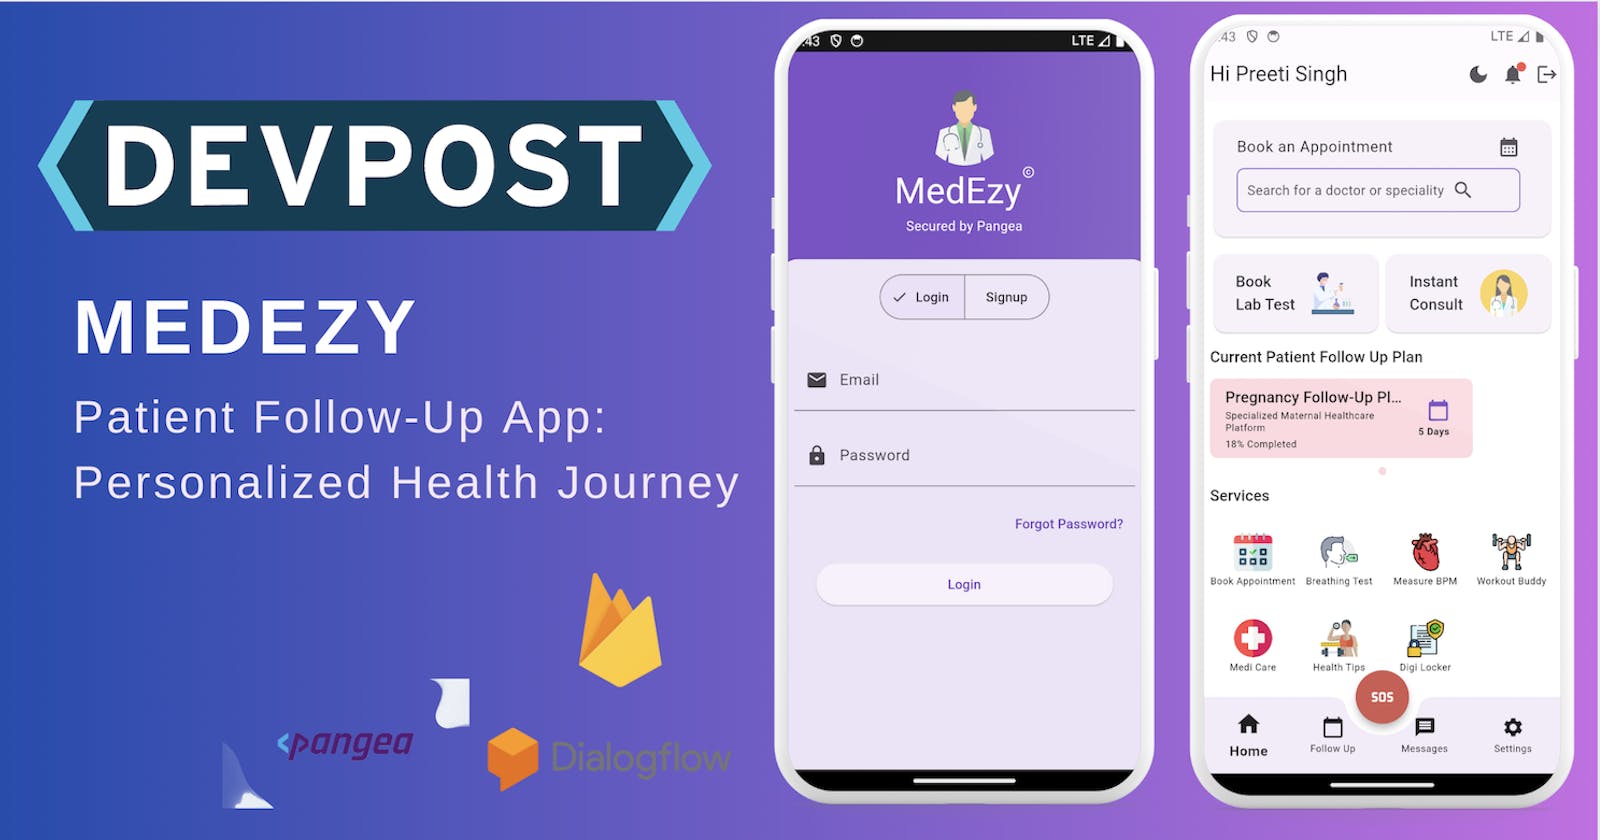 MedEzy: Your Health Journey Partner - A Devpost Hackathon with Pangea and Flutter